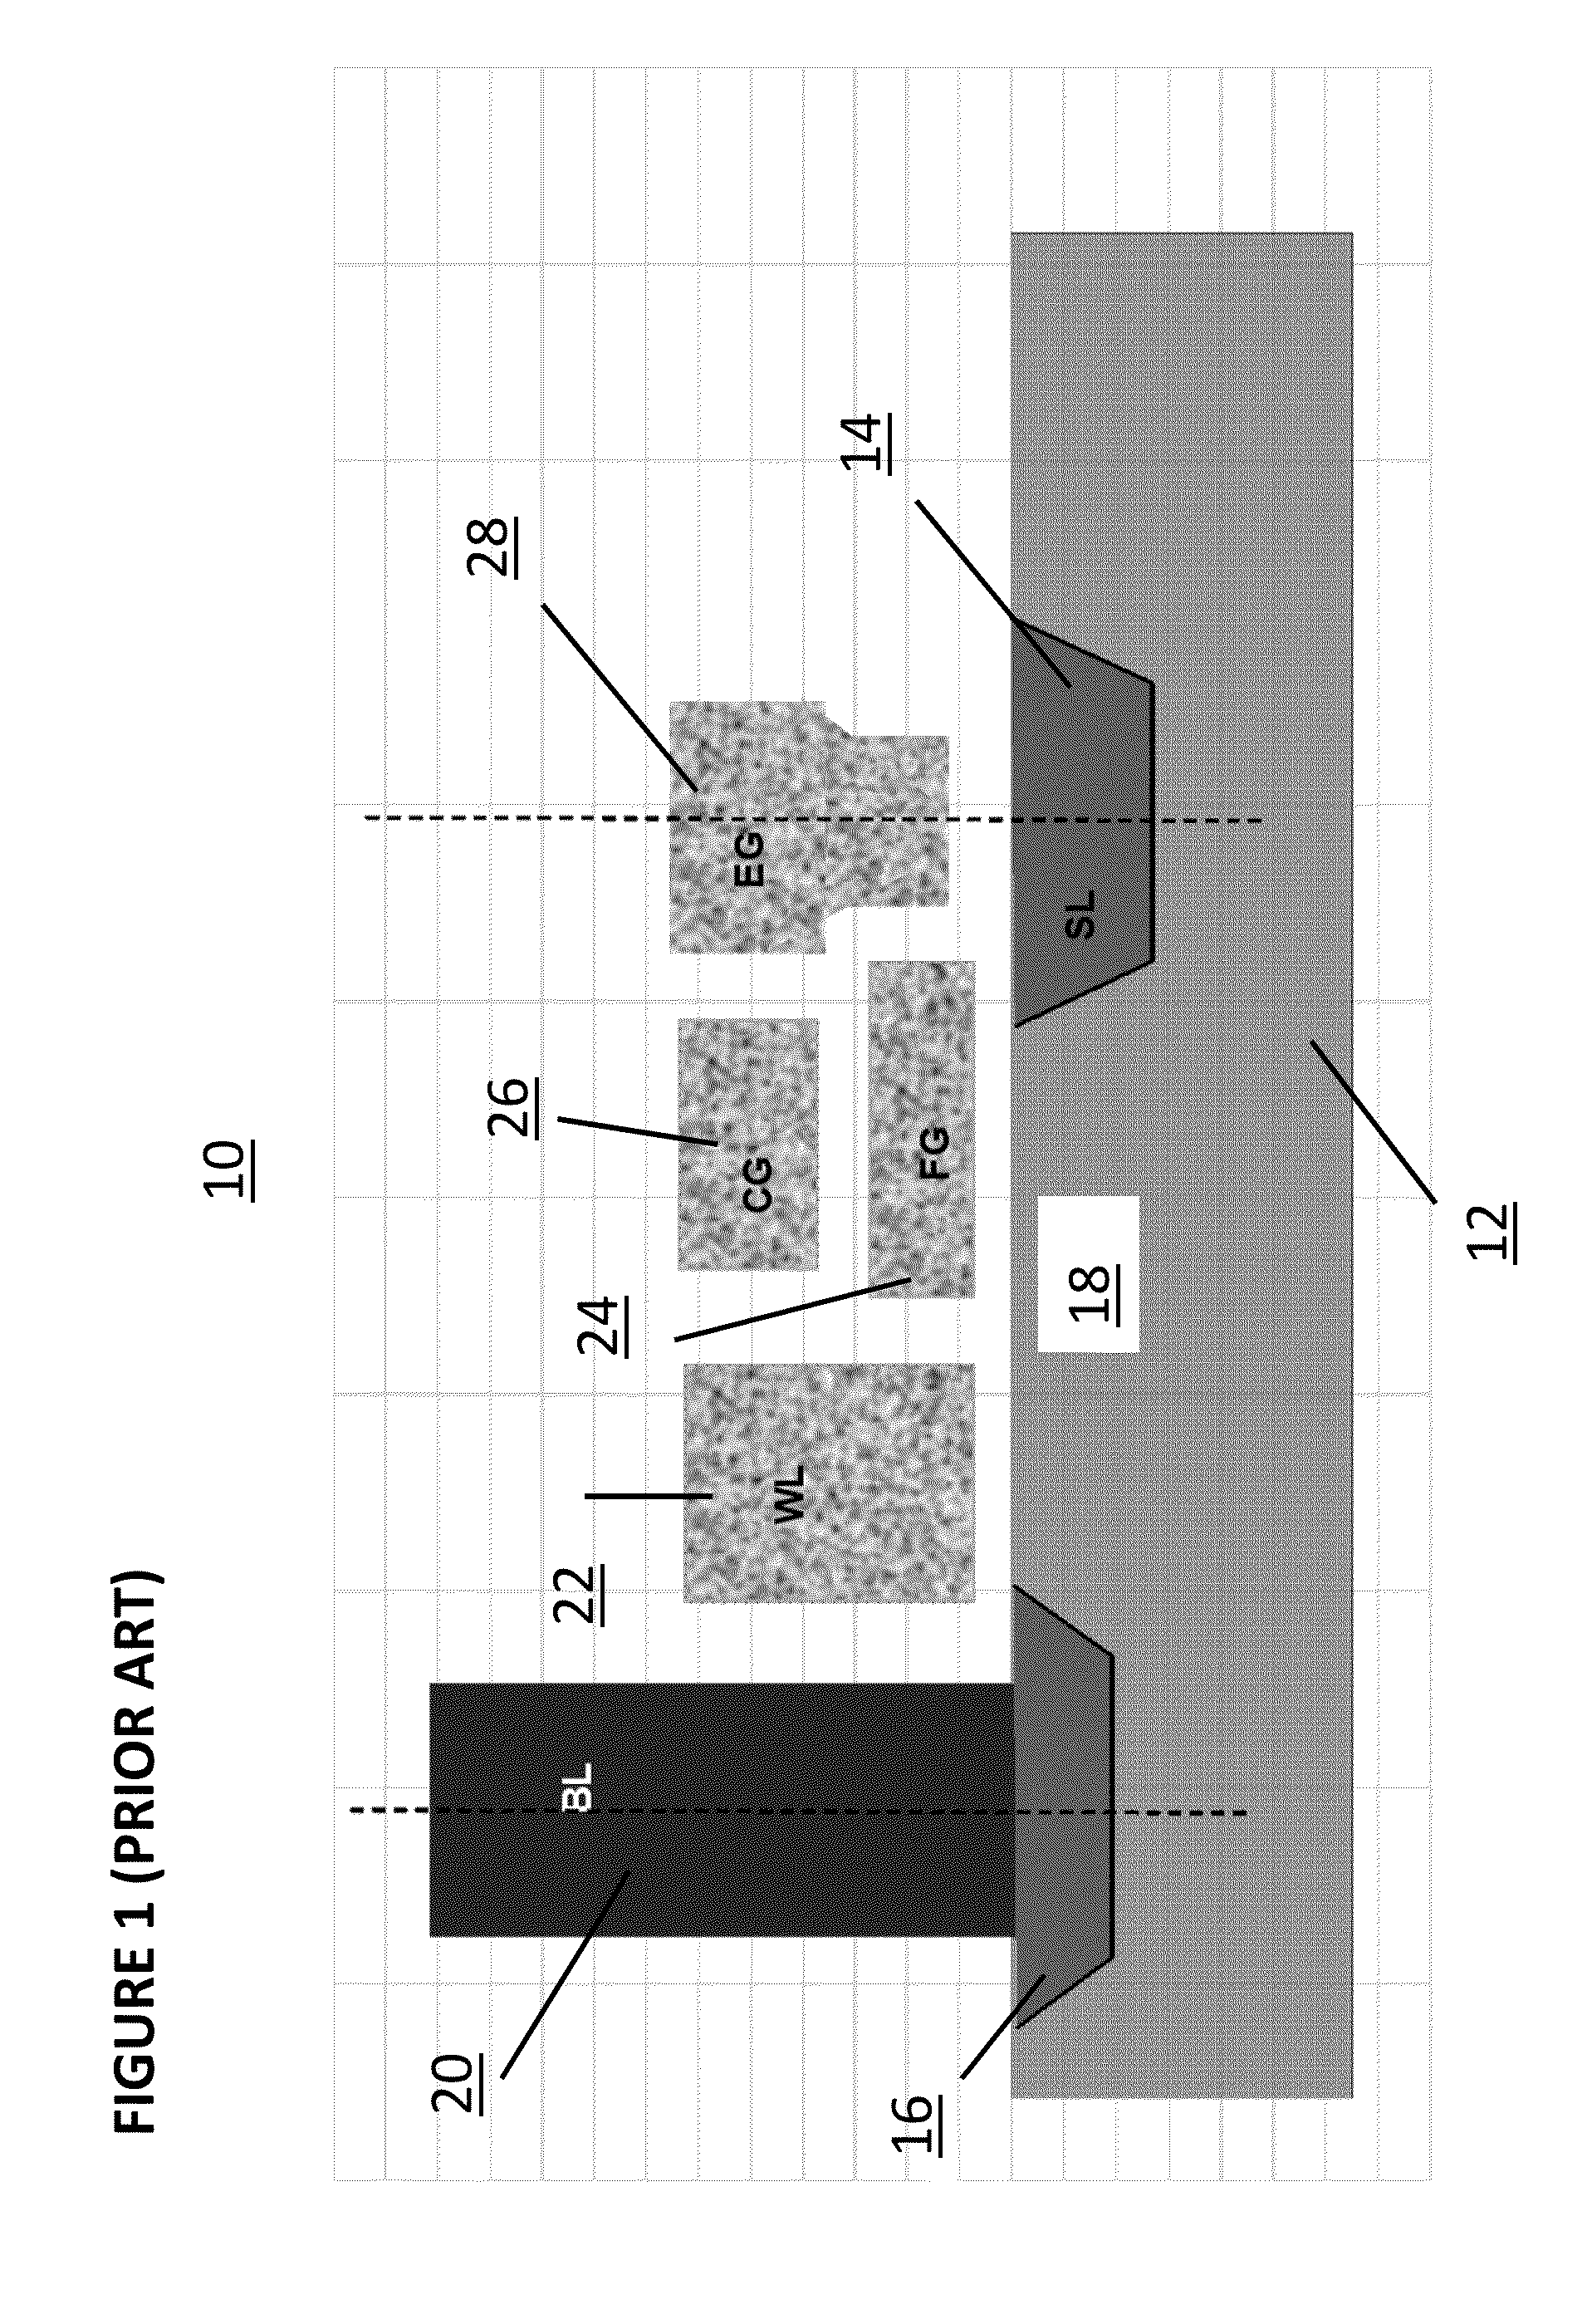 Flash Memory Device Configurable To Provide Read Only Memory Functionality